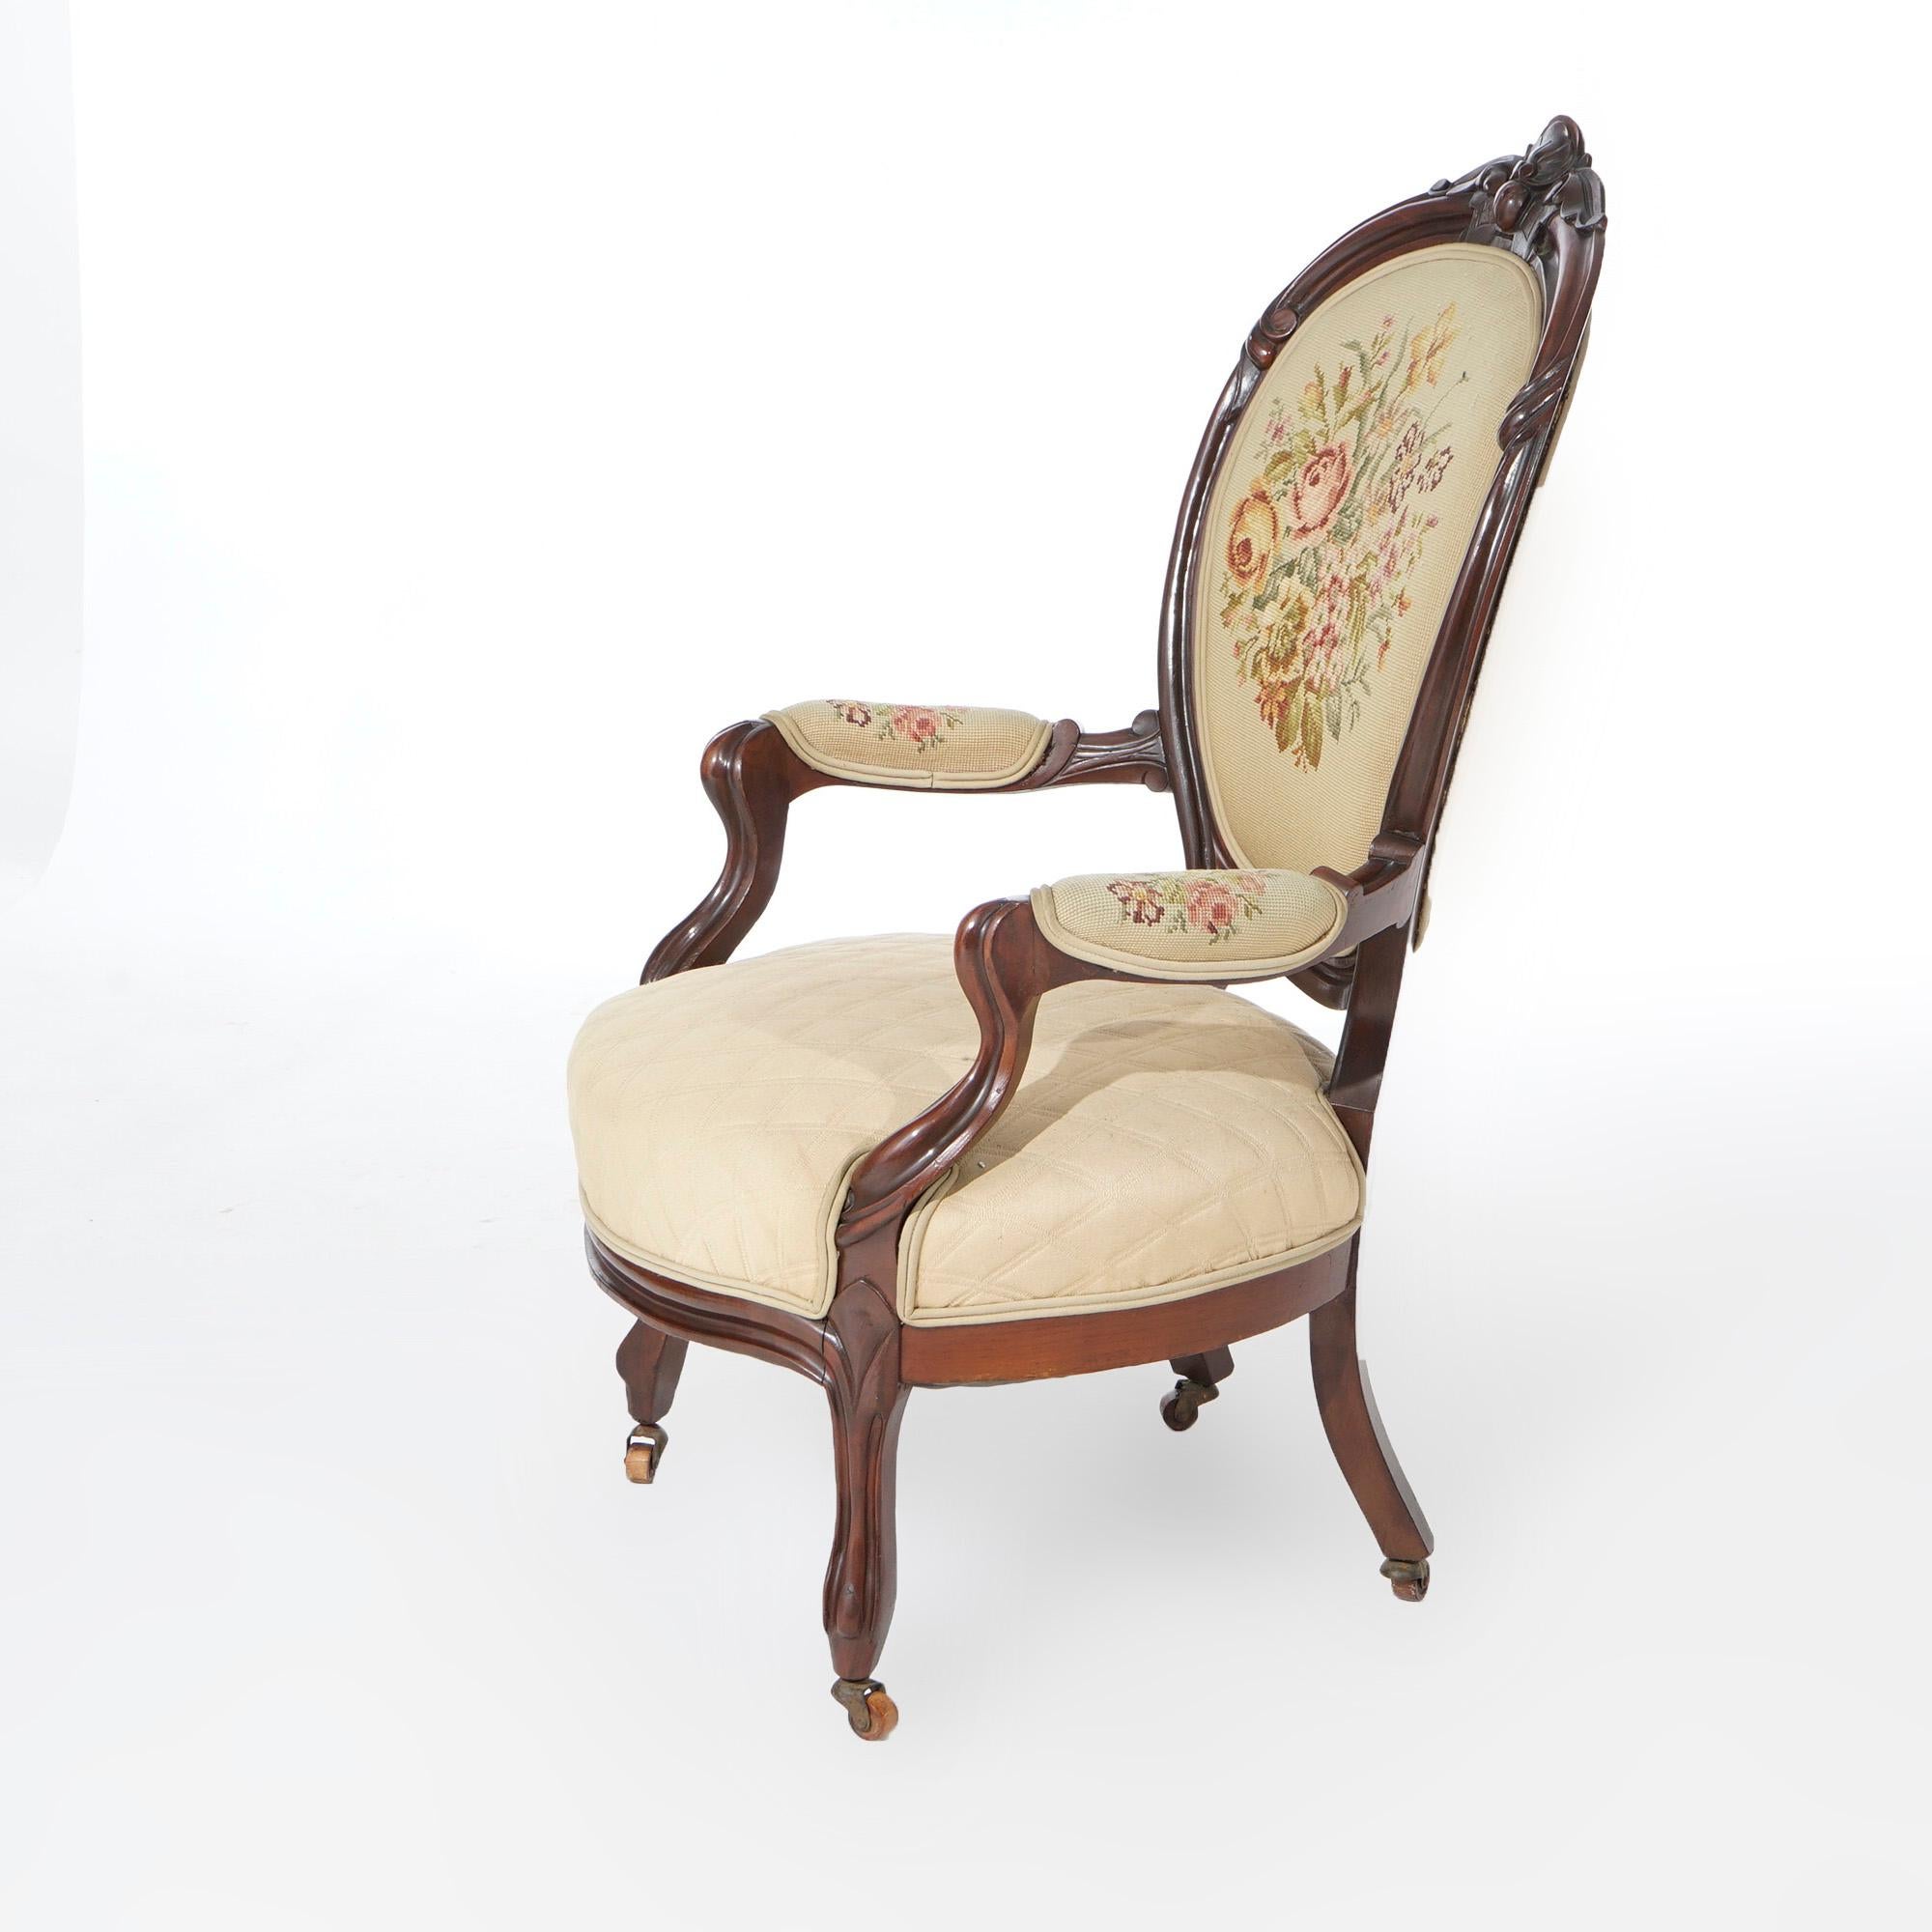 American Pair of Antique Victorian Carved Walnut & Needlepoint Parlor Chairs, Circa 1890